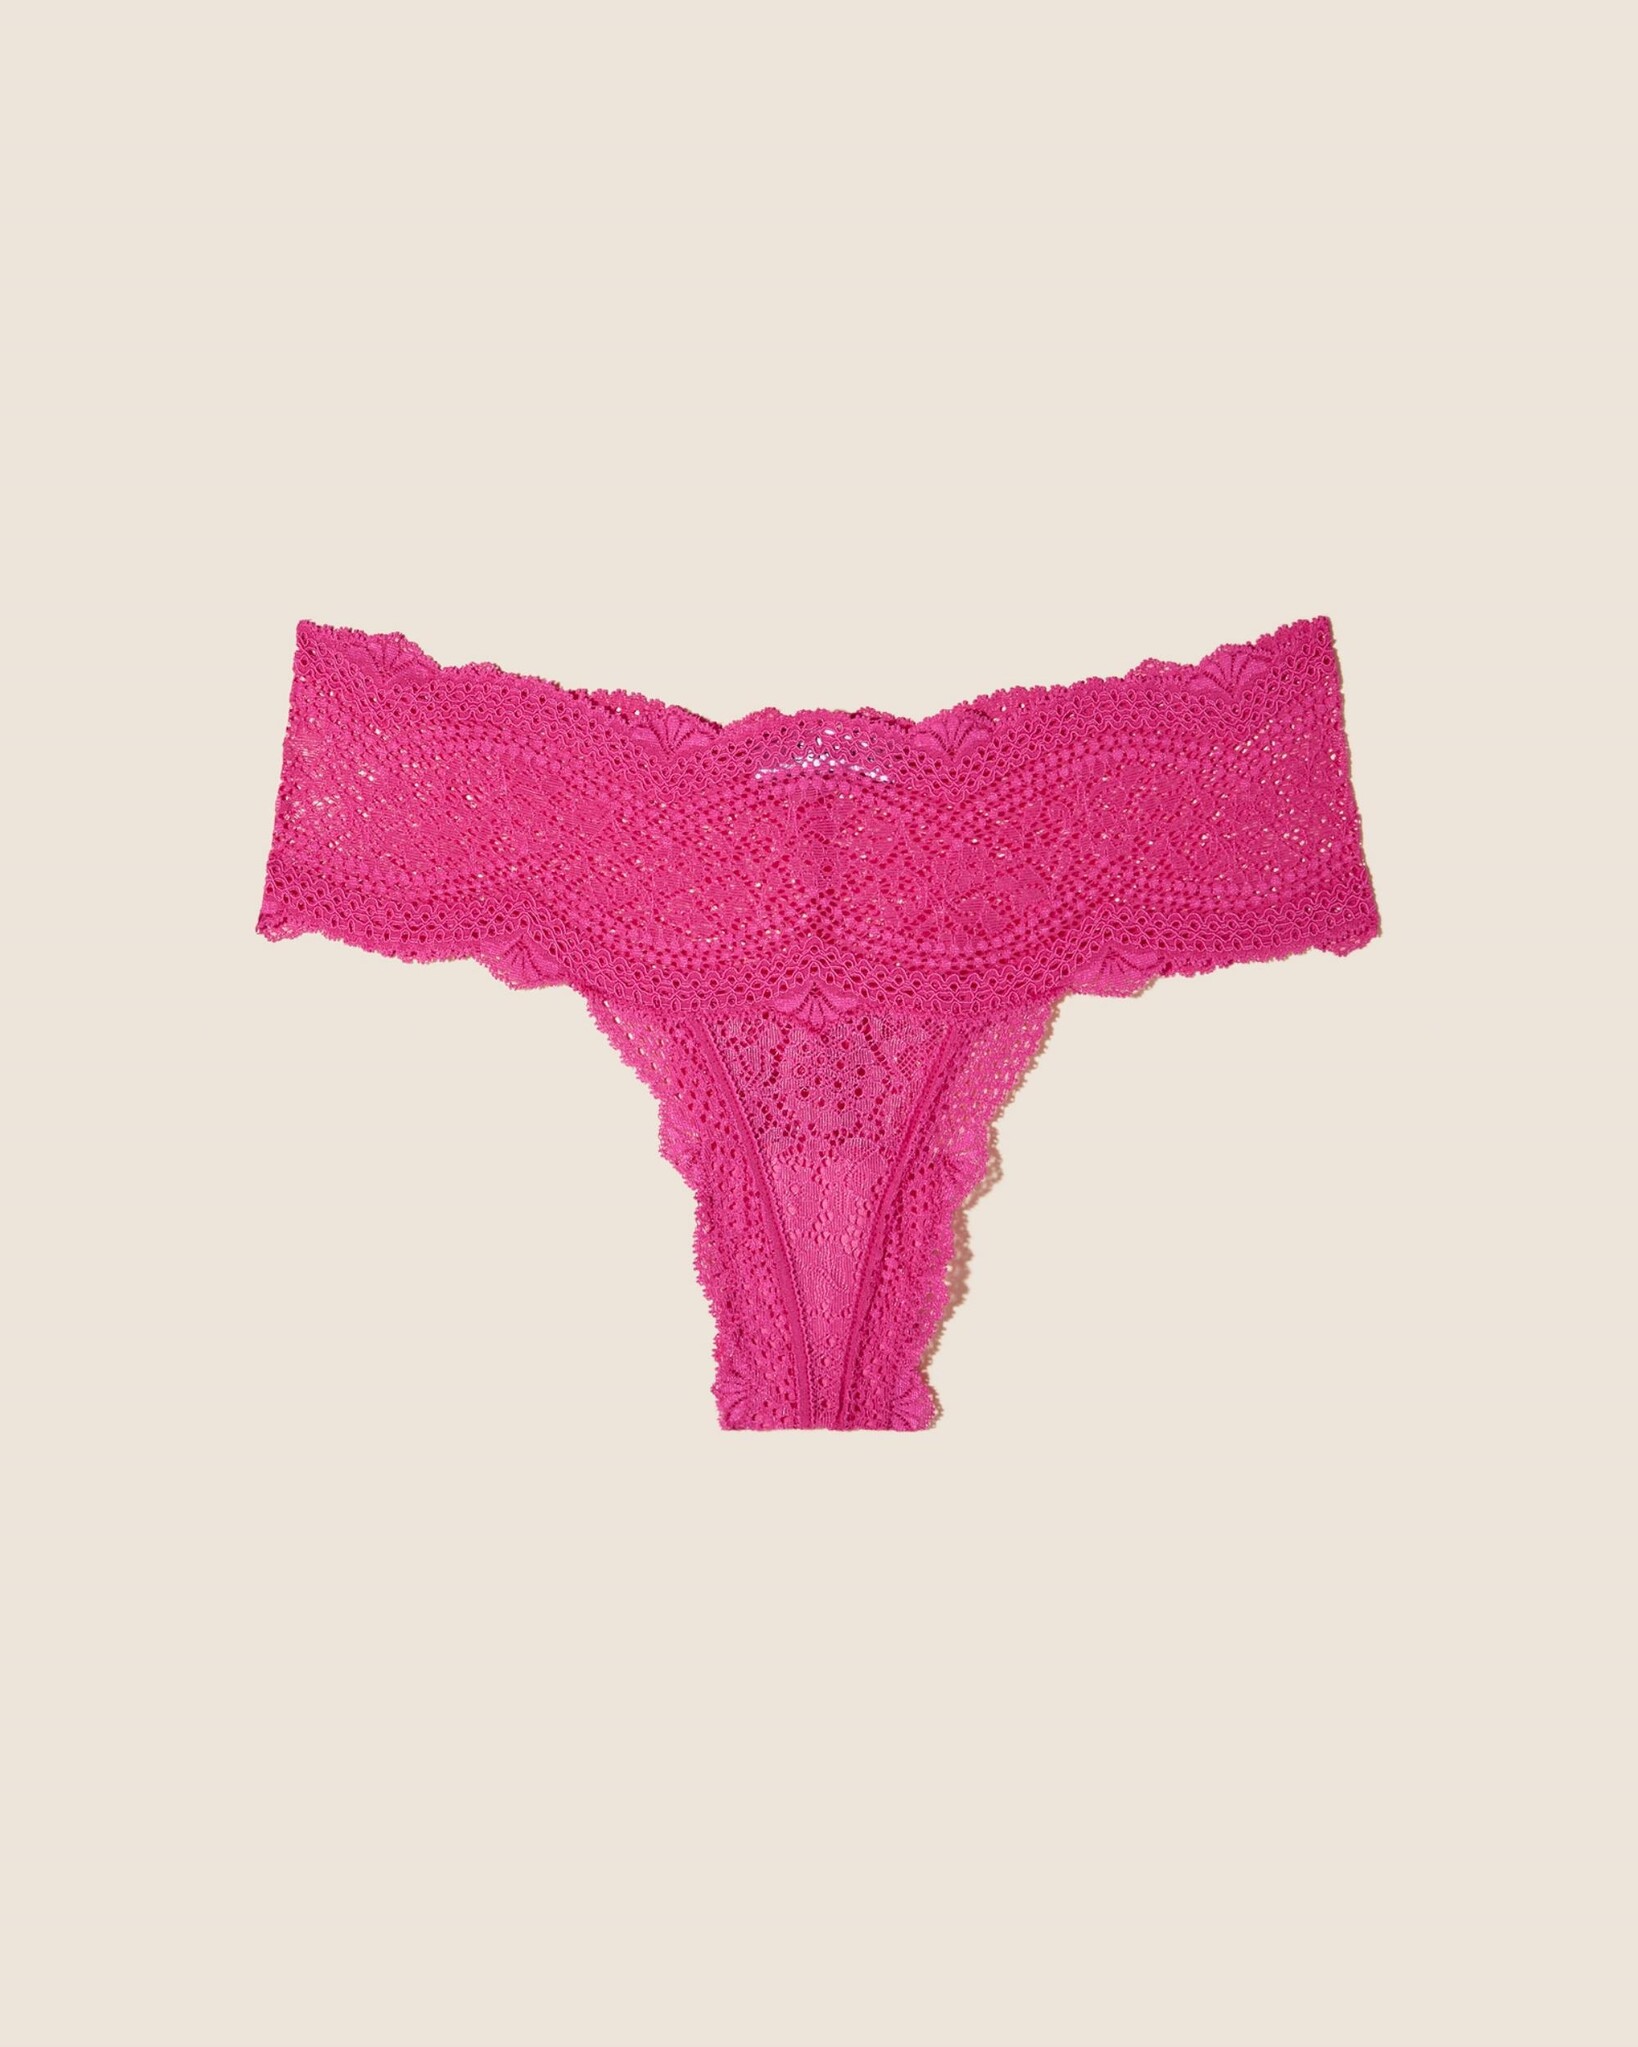 H&M underwear panty size Small